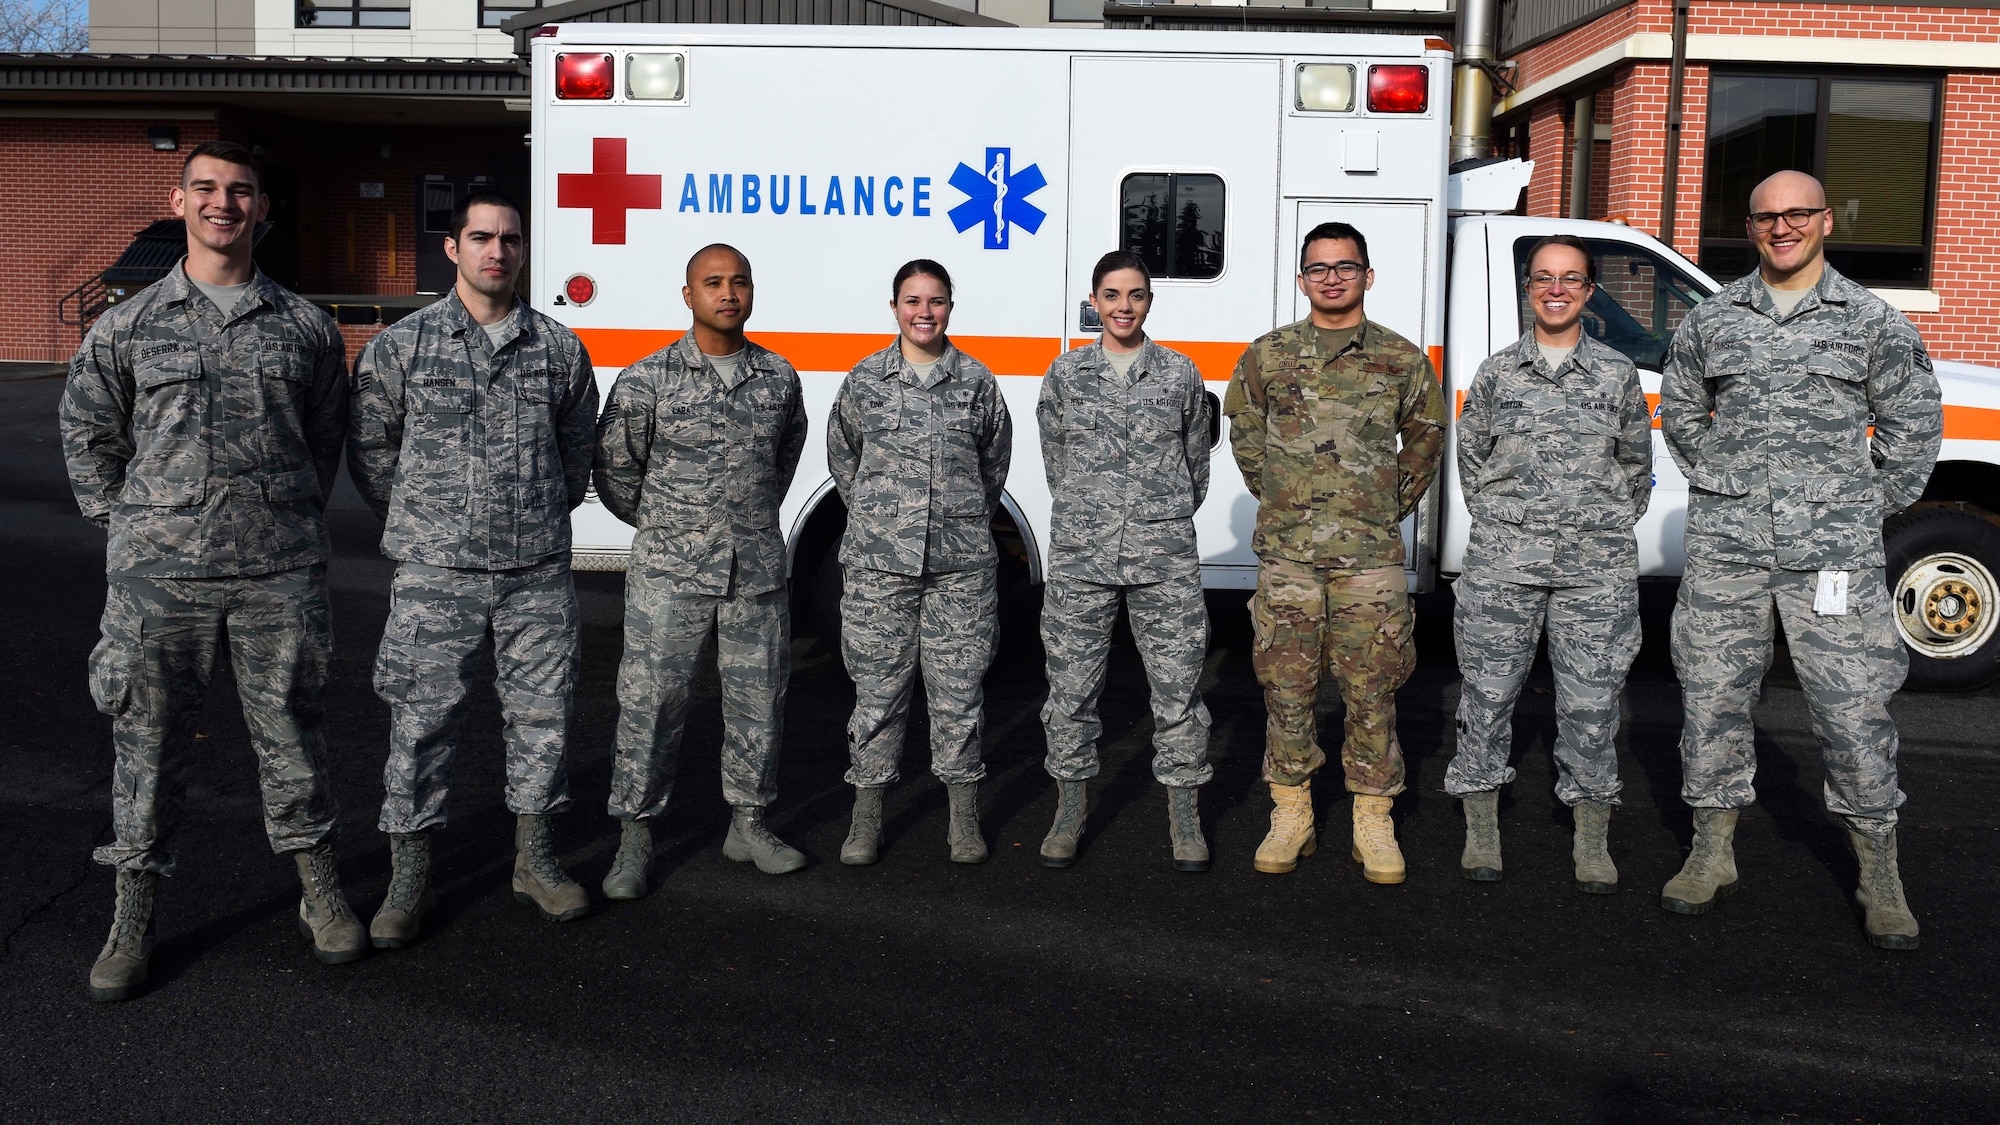 Airmen from the 92nd Medical Operation Squadron medical team pose for a photo at Fairchild Air Force Base, Washington, Nov. 13, 2018. The medical team responded to a respiratory distress call at the commissary on base, providing first aid care and saving a man’s life. (U.S. Air Force photo/Airman 1st Class Lawrence Sena)